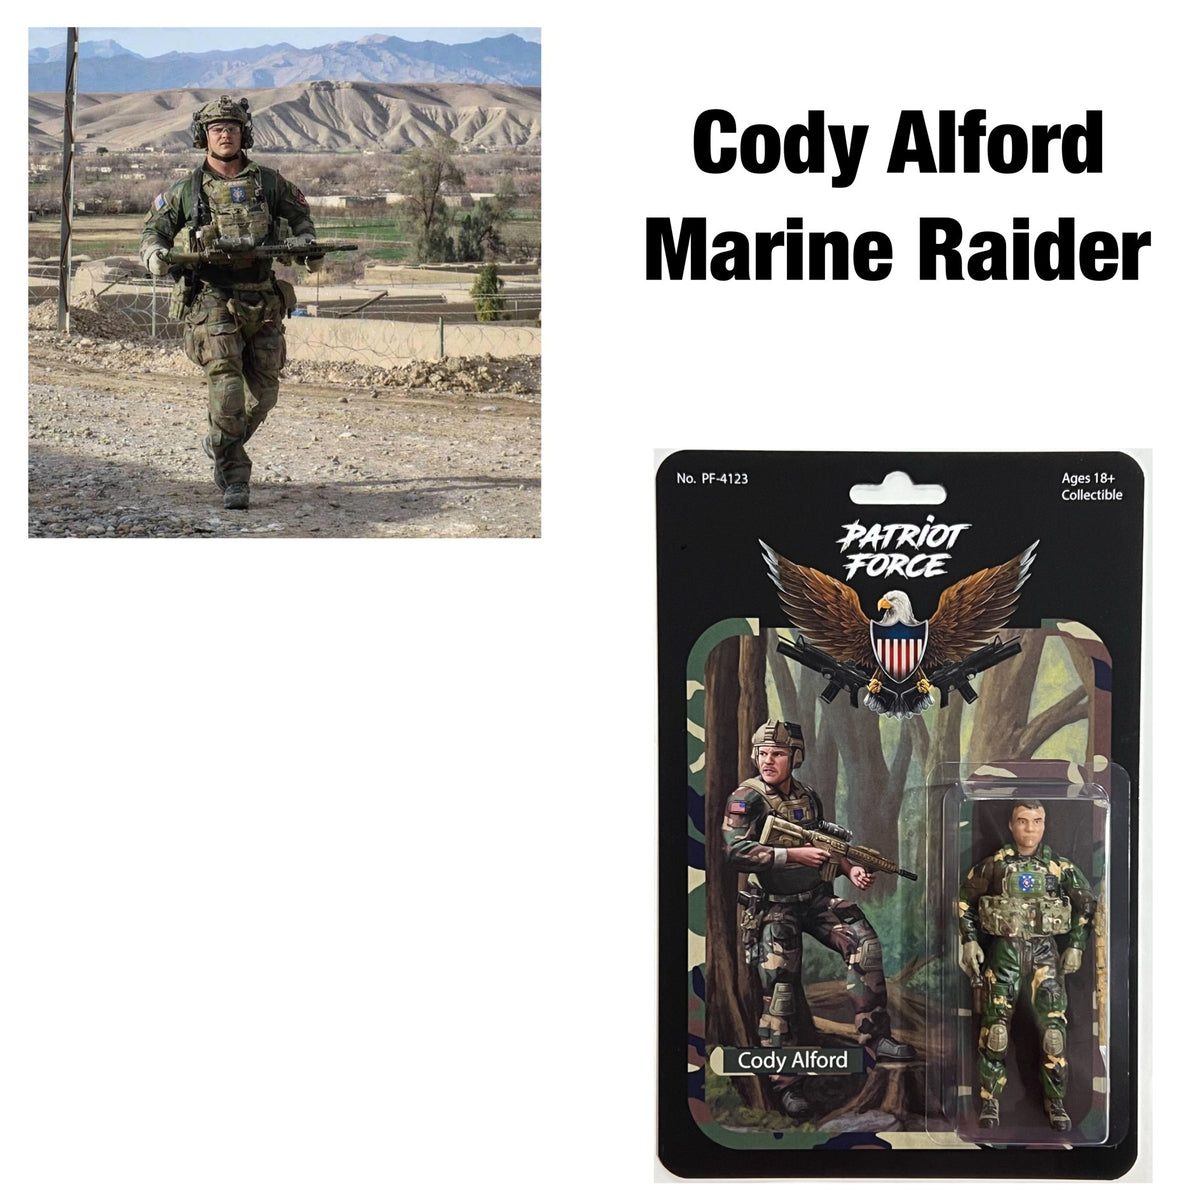 More realistic tactical gear please? Marine Raiders or ever Army